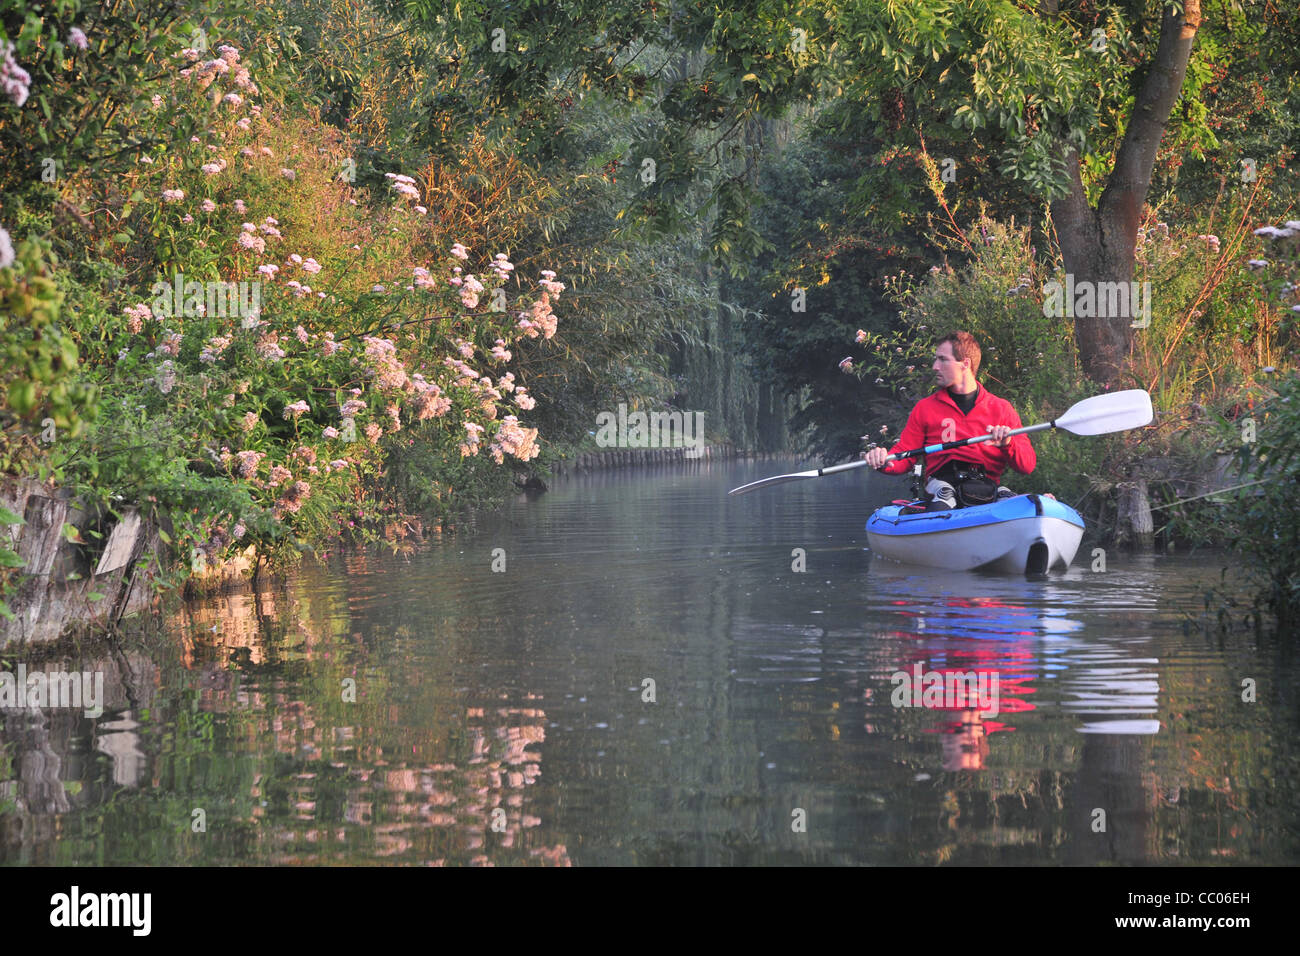 KAYAKING THROUGH THE HORTILLONNAGES OR FLOATING GARDENS, AMIENS, SOMME (80), FRANCE Stock Photo